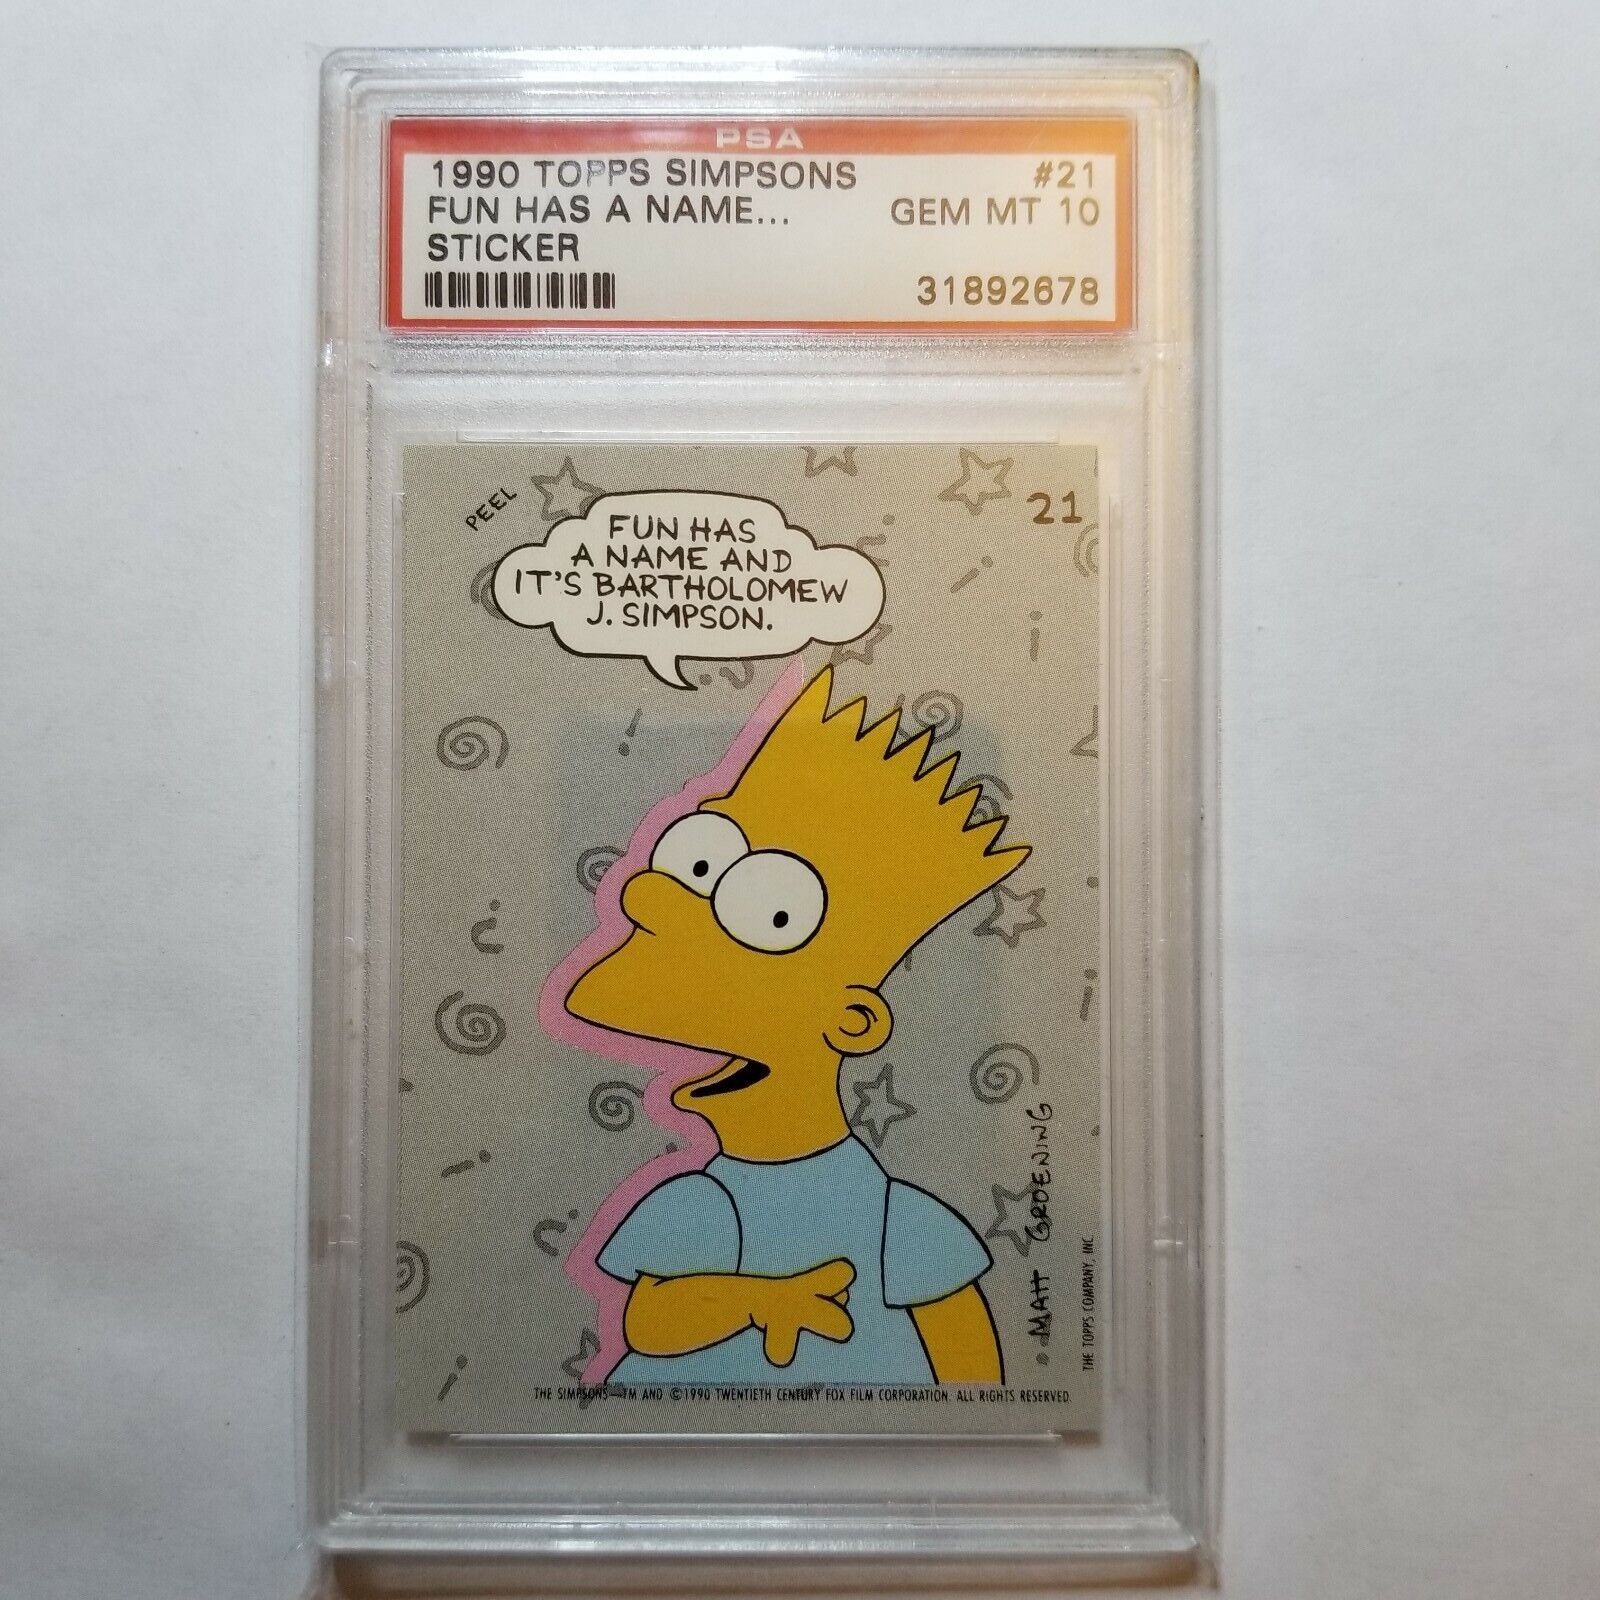 1990 TOPPS BART SIMPSONS STICKER THE SIMPSONS FUN HAS A NAME #22 PSA 10 POP 2